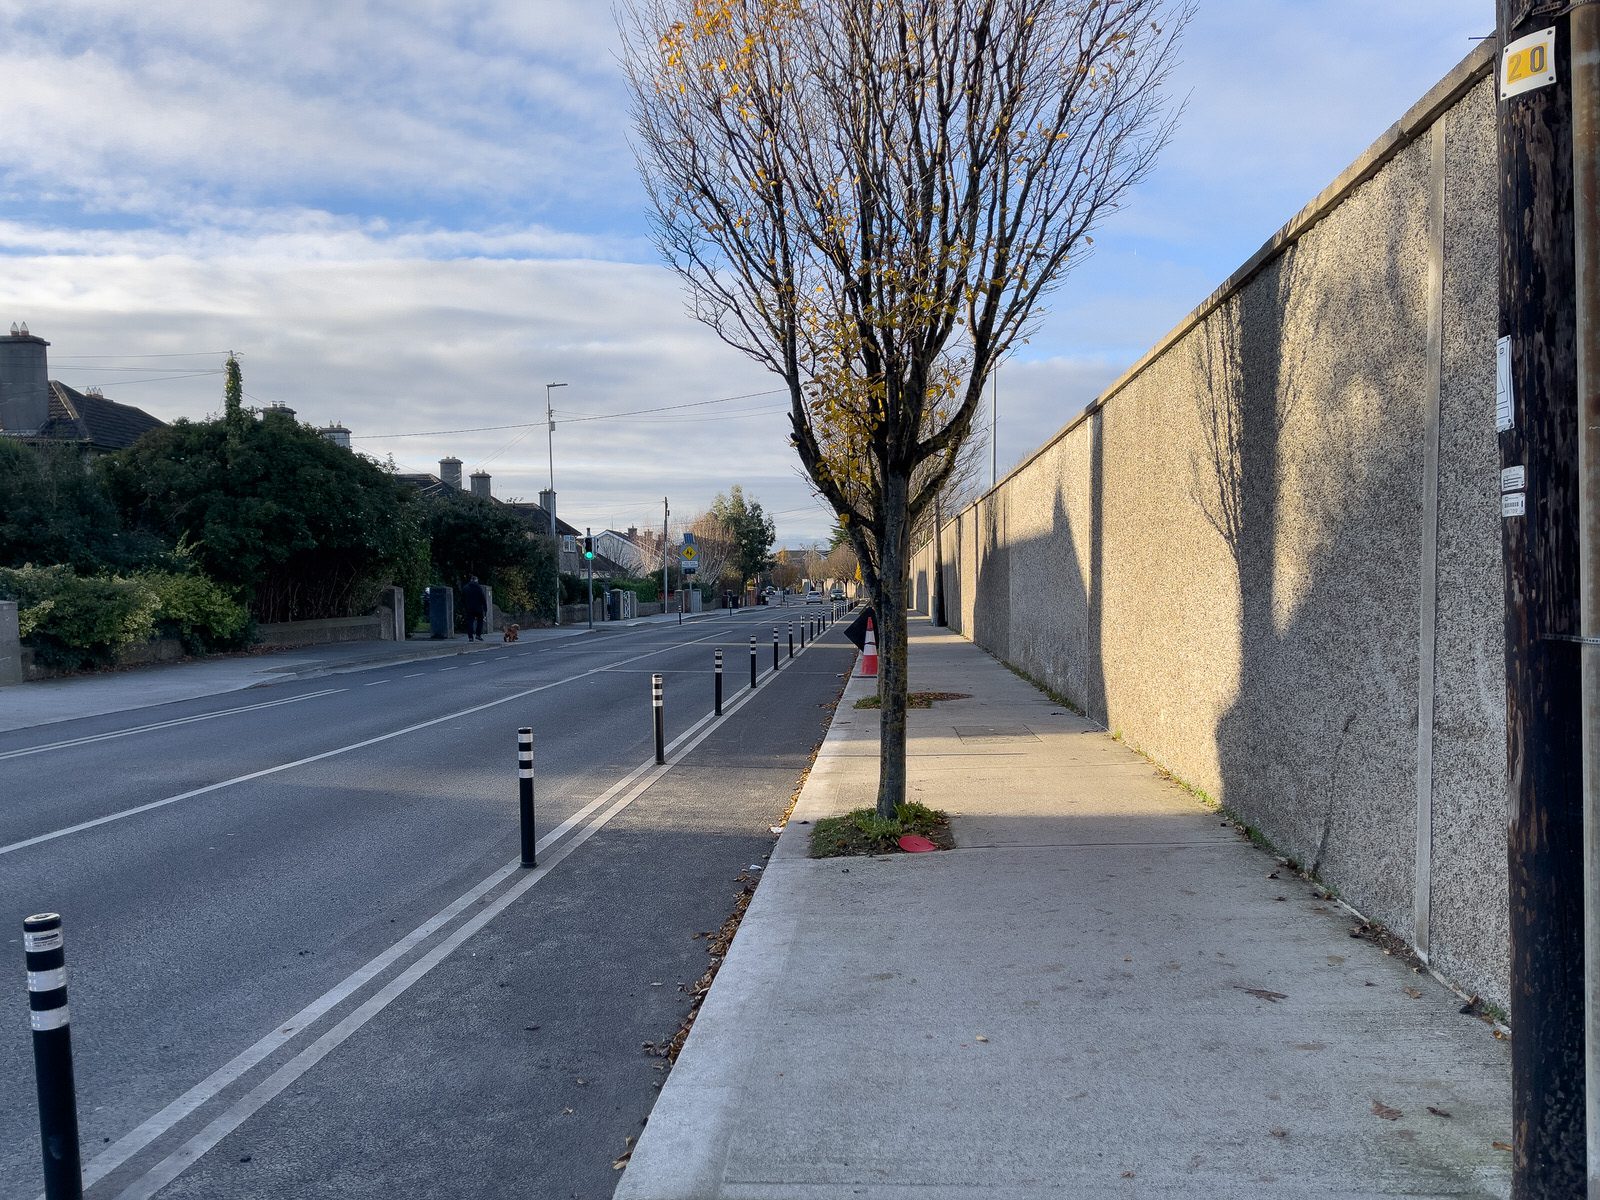 MY FIRST DAY WITHOUT THE 17 BUS SERVICE [WALK FROM S4 BUS STOP IN UCD TO ROEBUCK ROAD]-225592-1